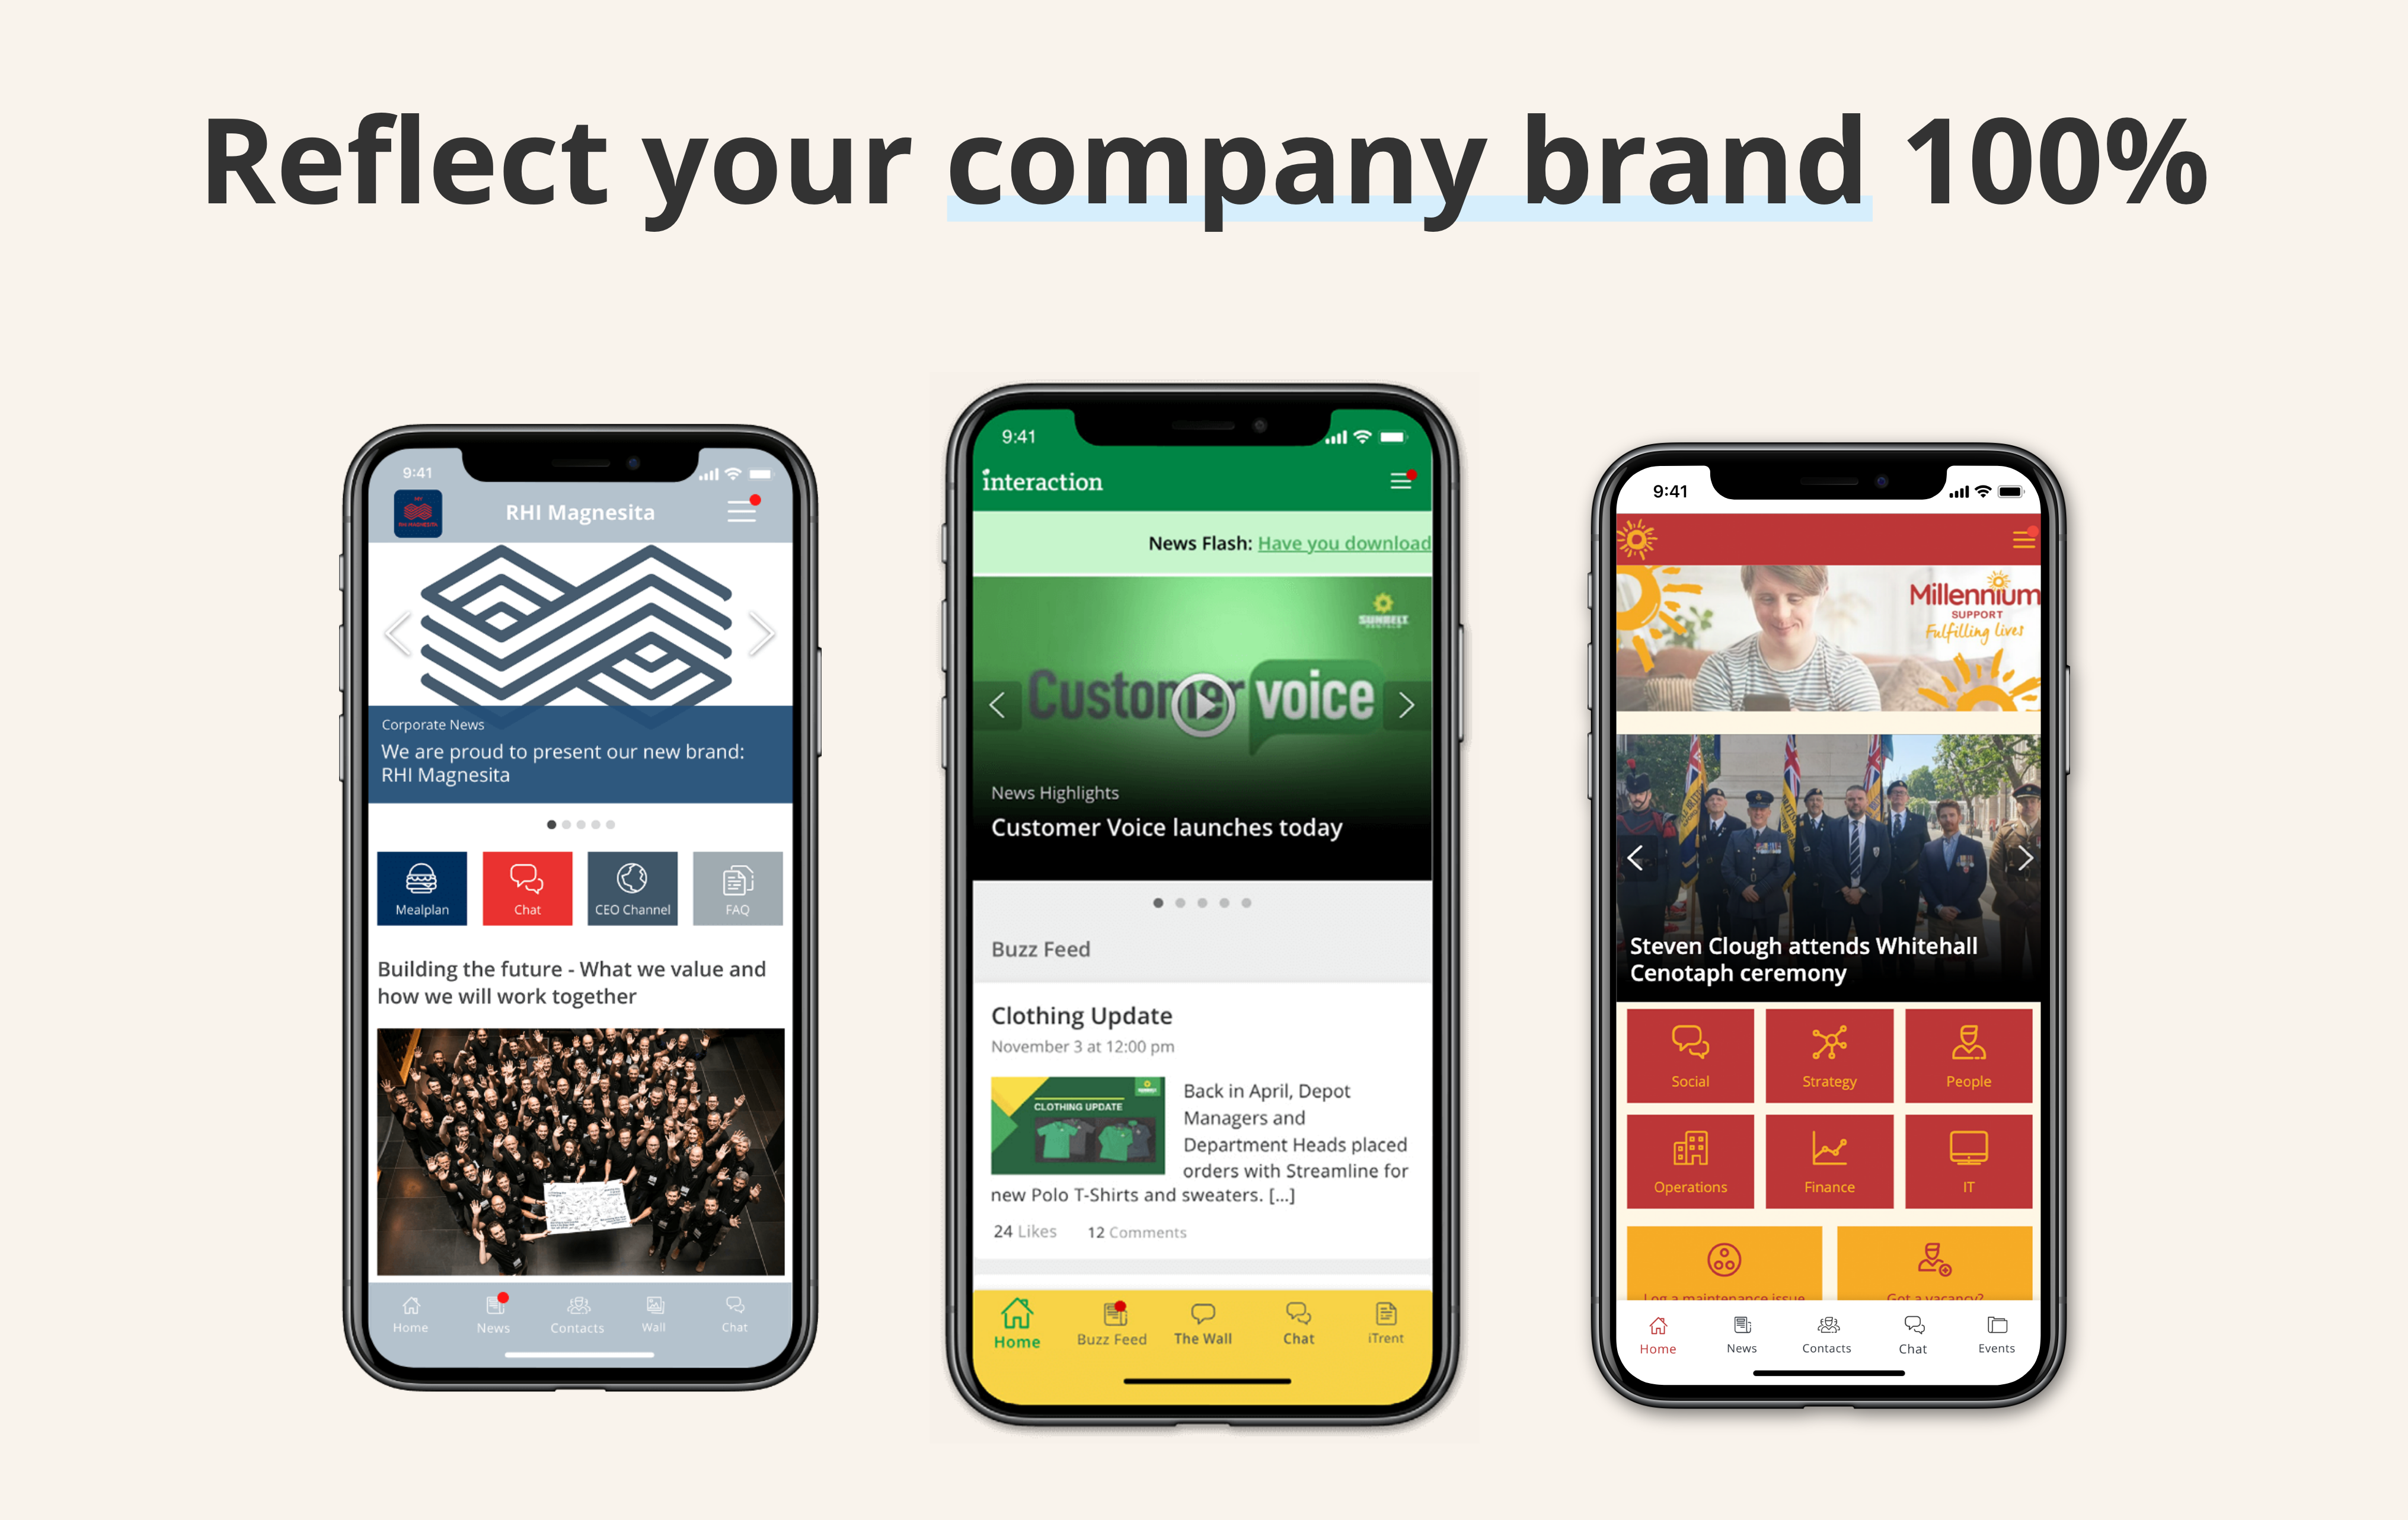 Personalize every detail of your Staffbase platform from colors and icons, to the platform name. Employees download the fully-branded app directly from public app stores—no email addresses or private telephone numbers required.